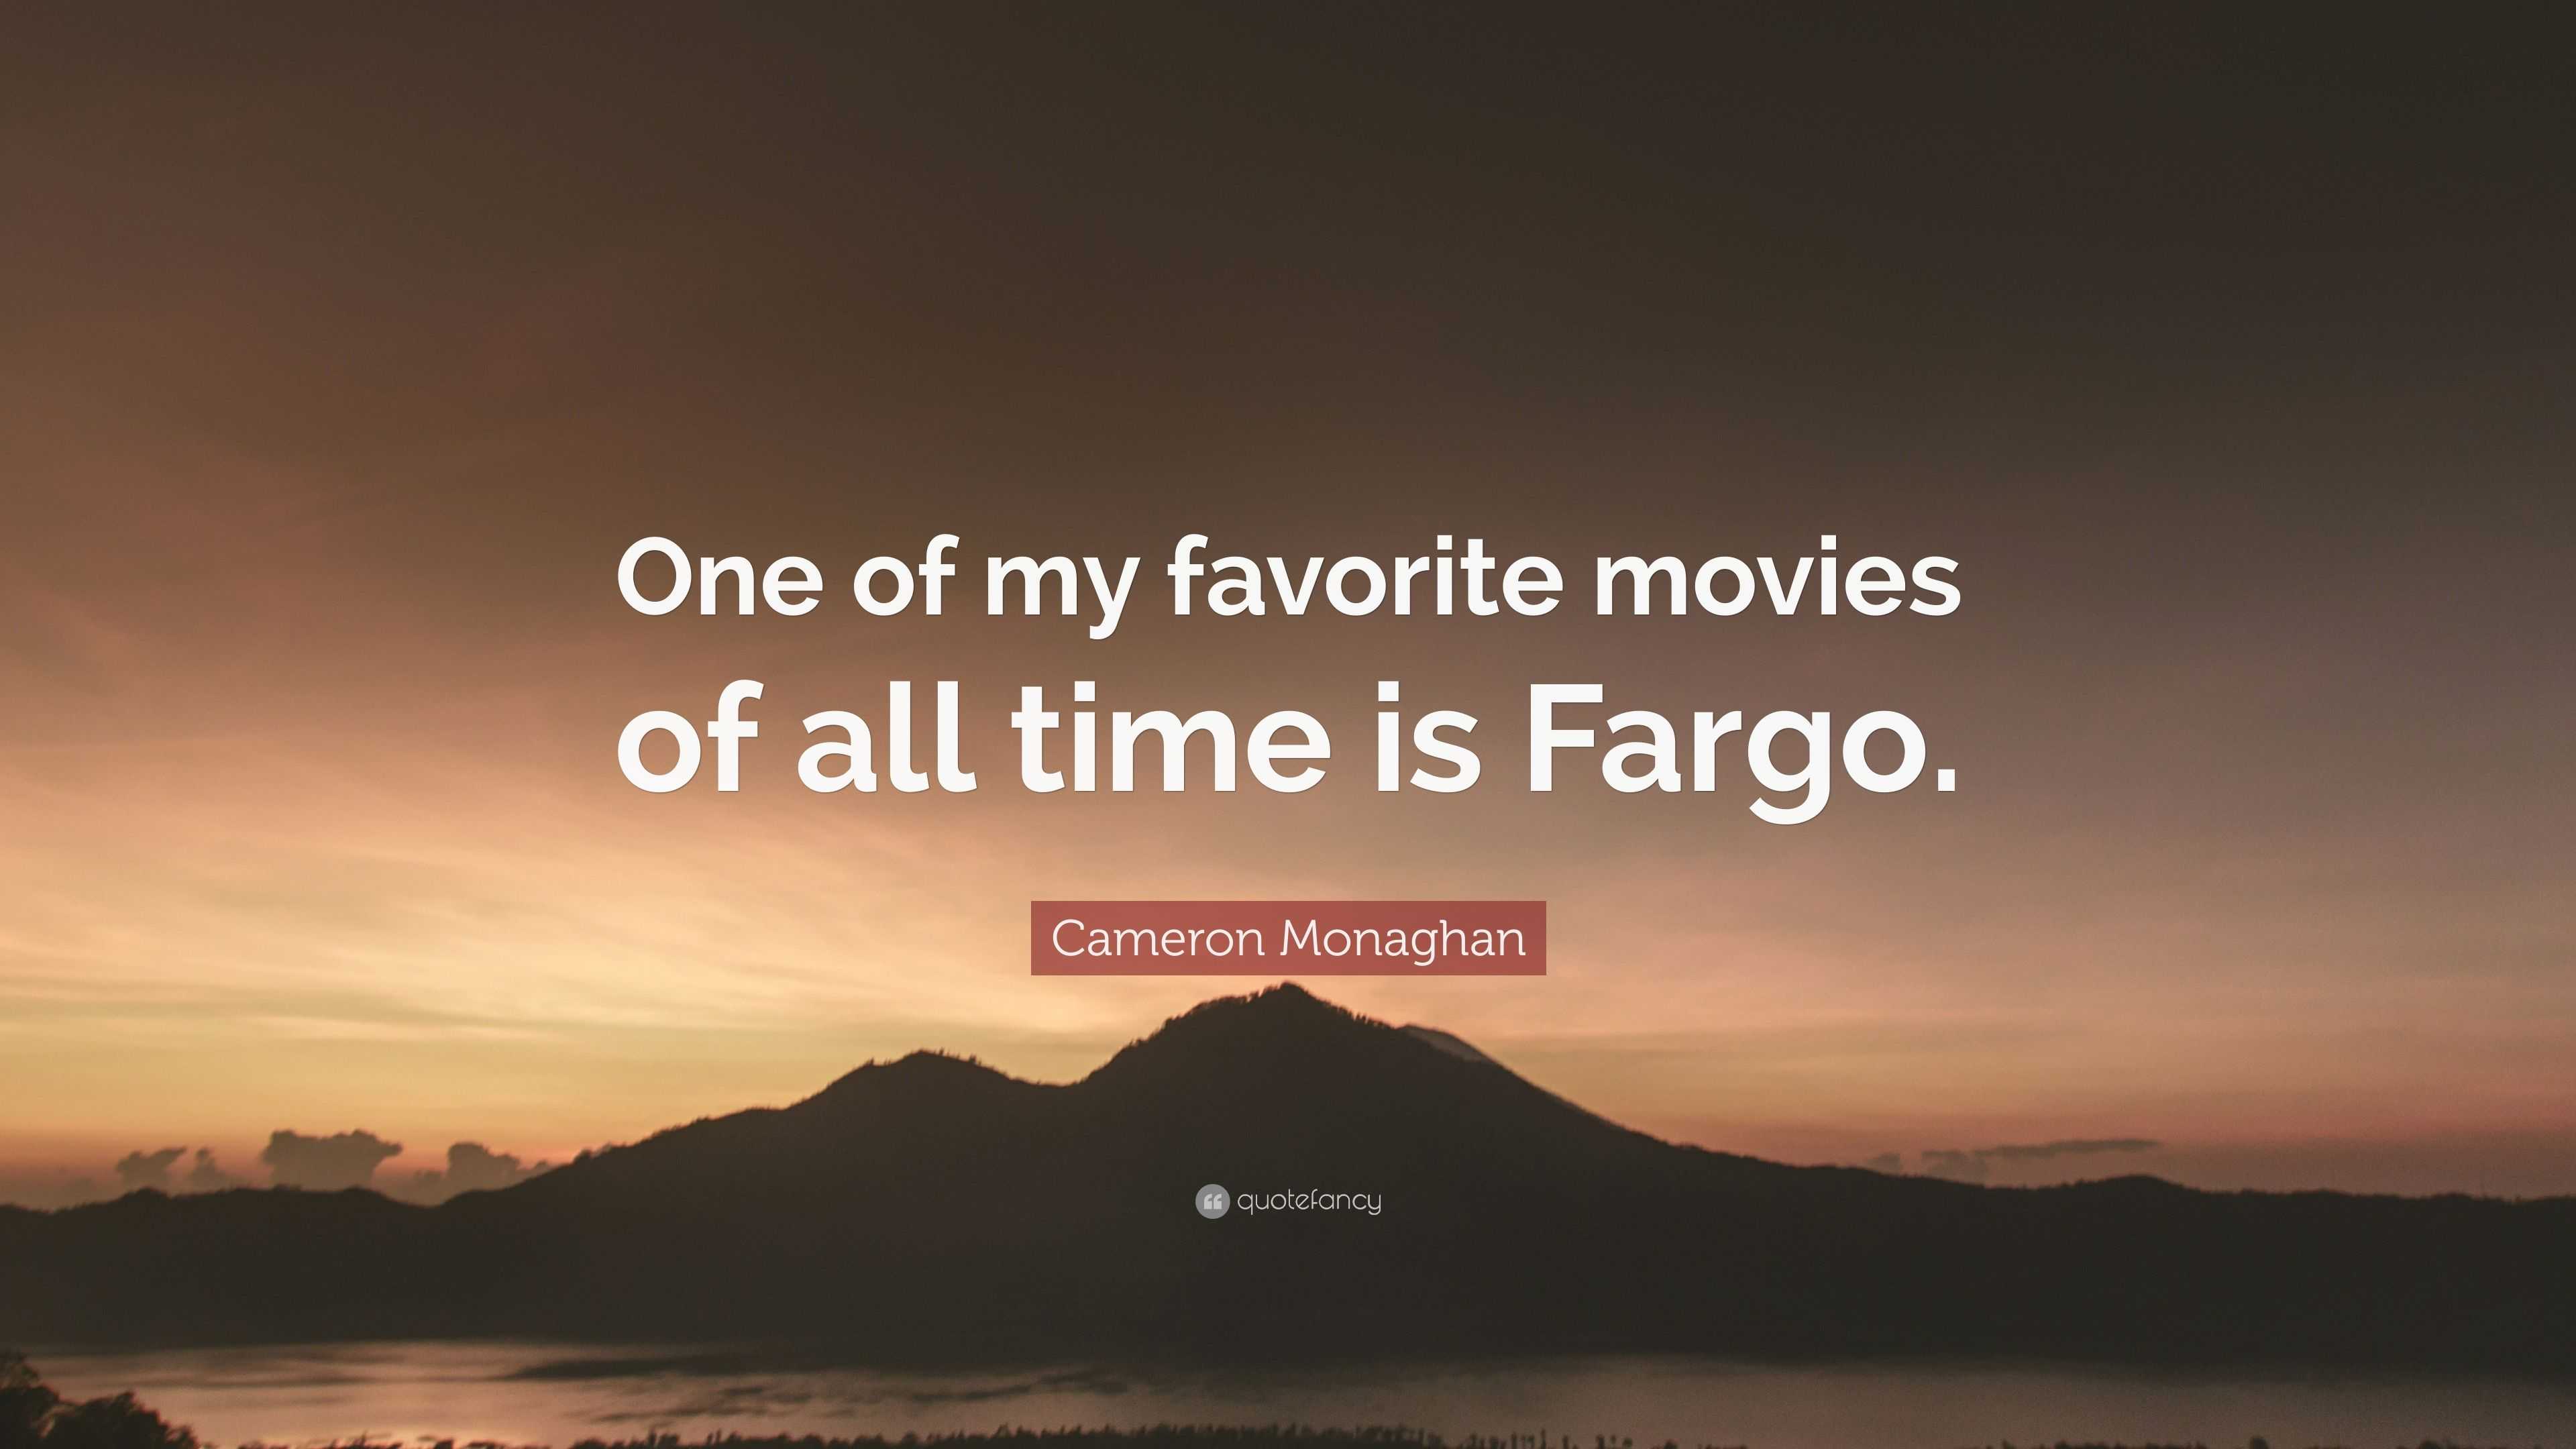 Cameron Monaghan Quote One Of My Favorite Movies Of All Time Is Images, Photos, Reviews